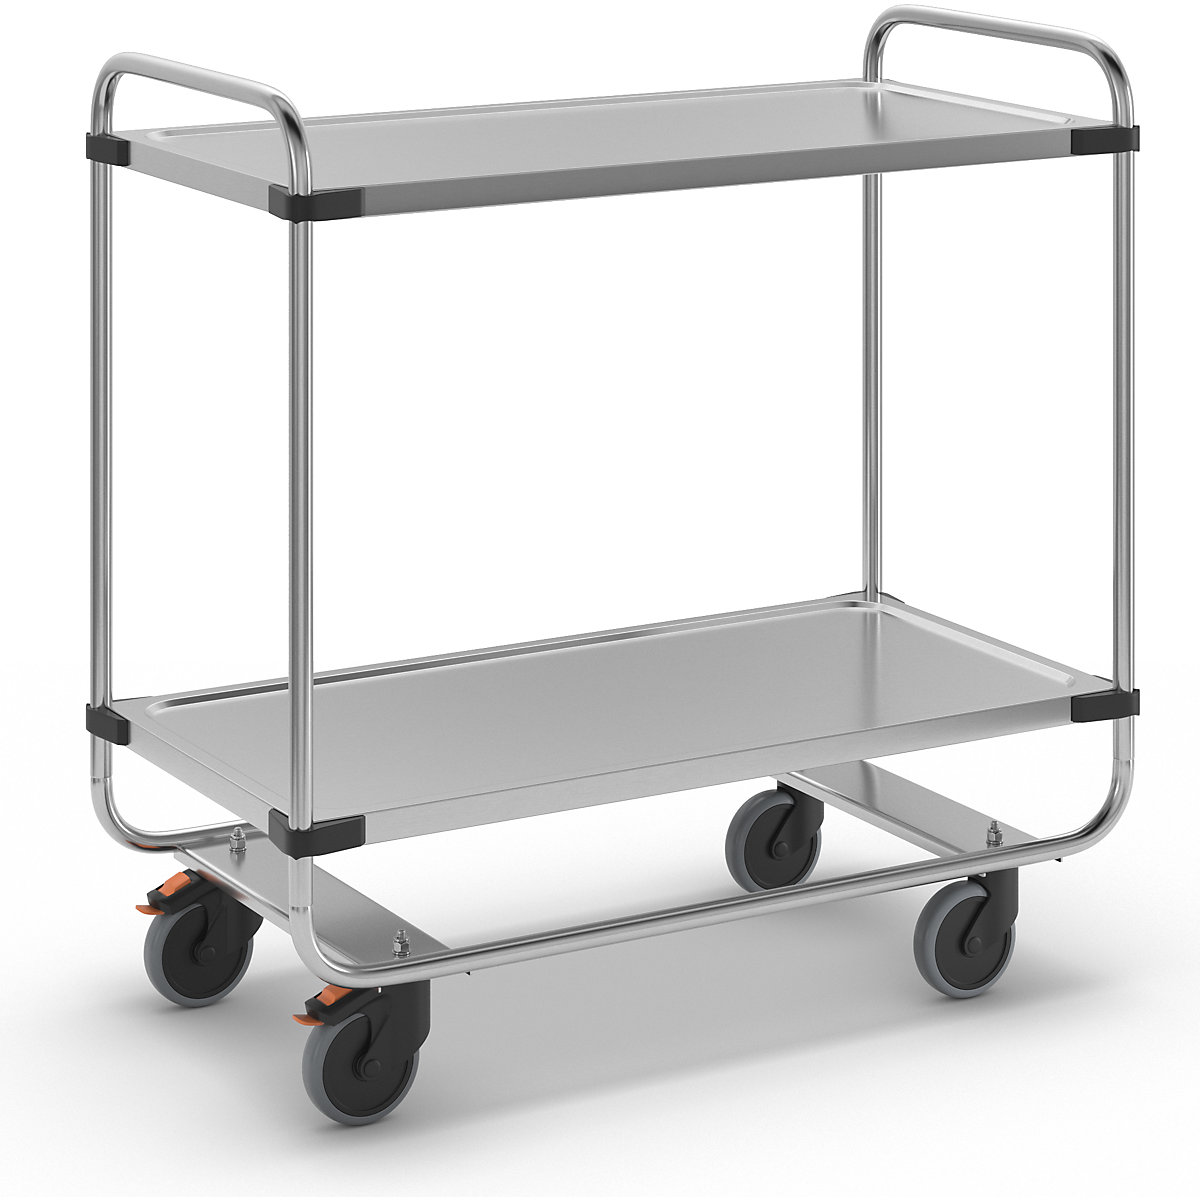 Stainless steel serving trolley, assembled, with 2 shelves, LxWxH 1035 x 535 x 1010 mm-1